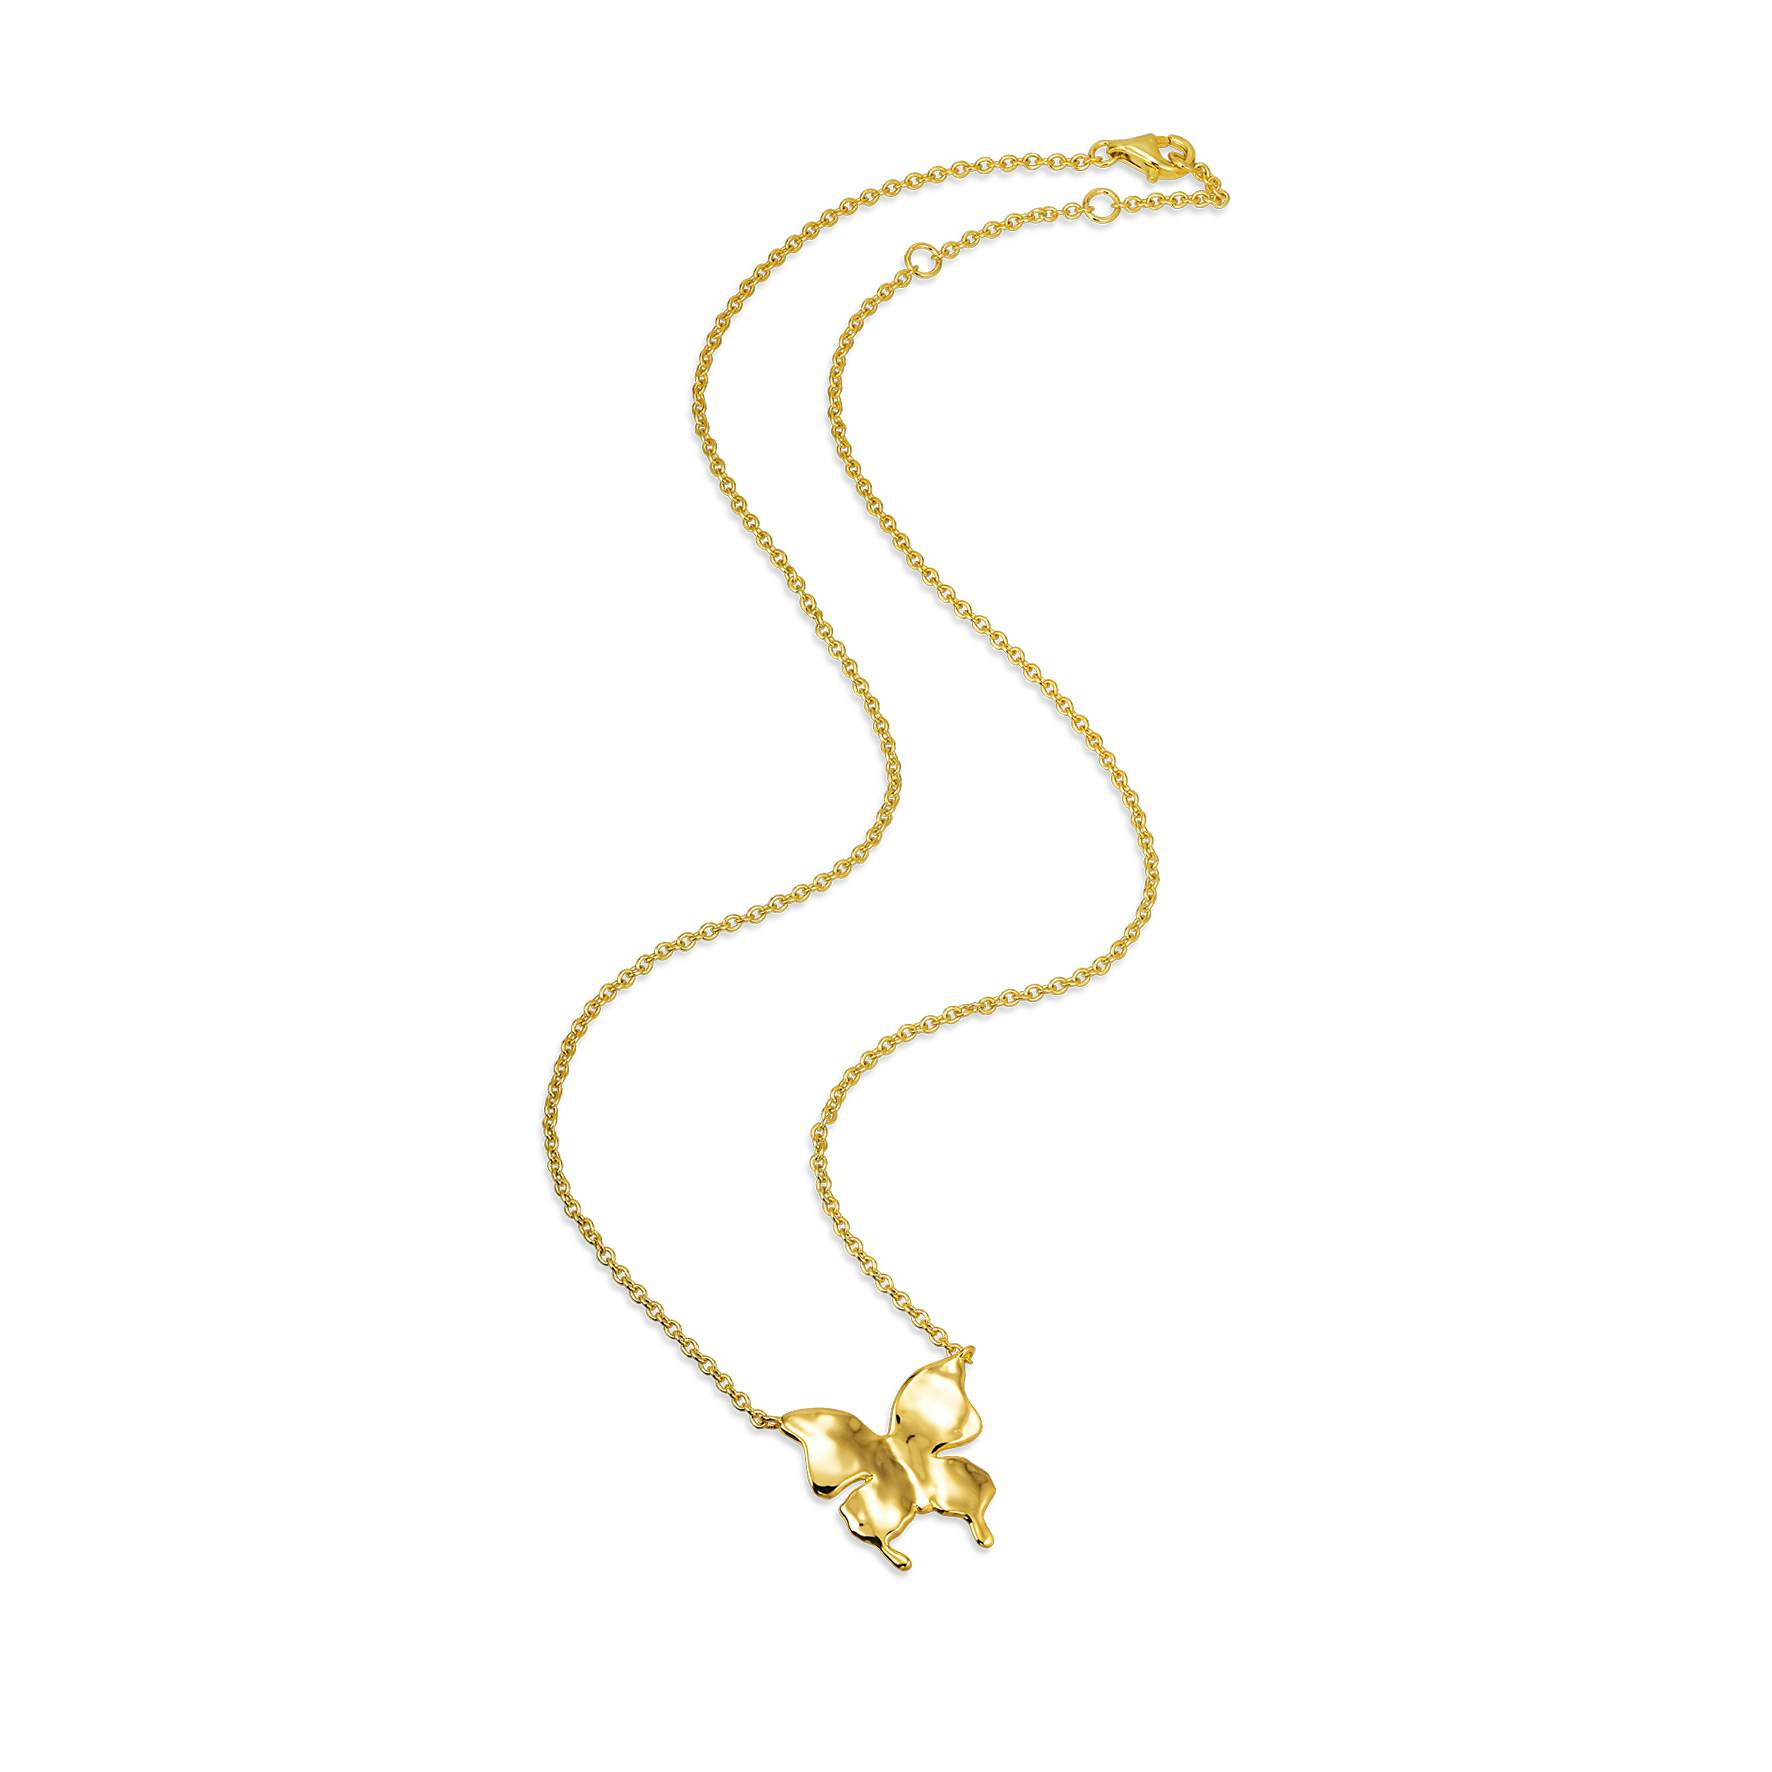 Butterfly Necklace from Jane Kønig in Goldplated-Silver Sterling 925